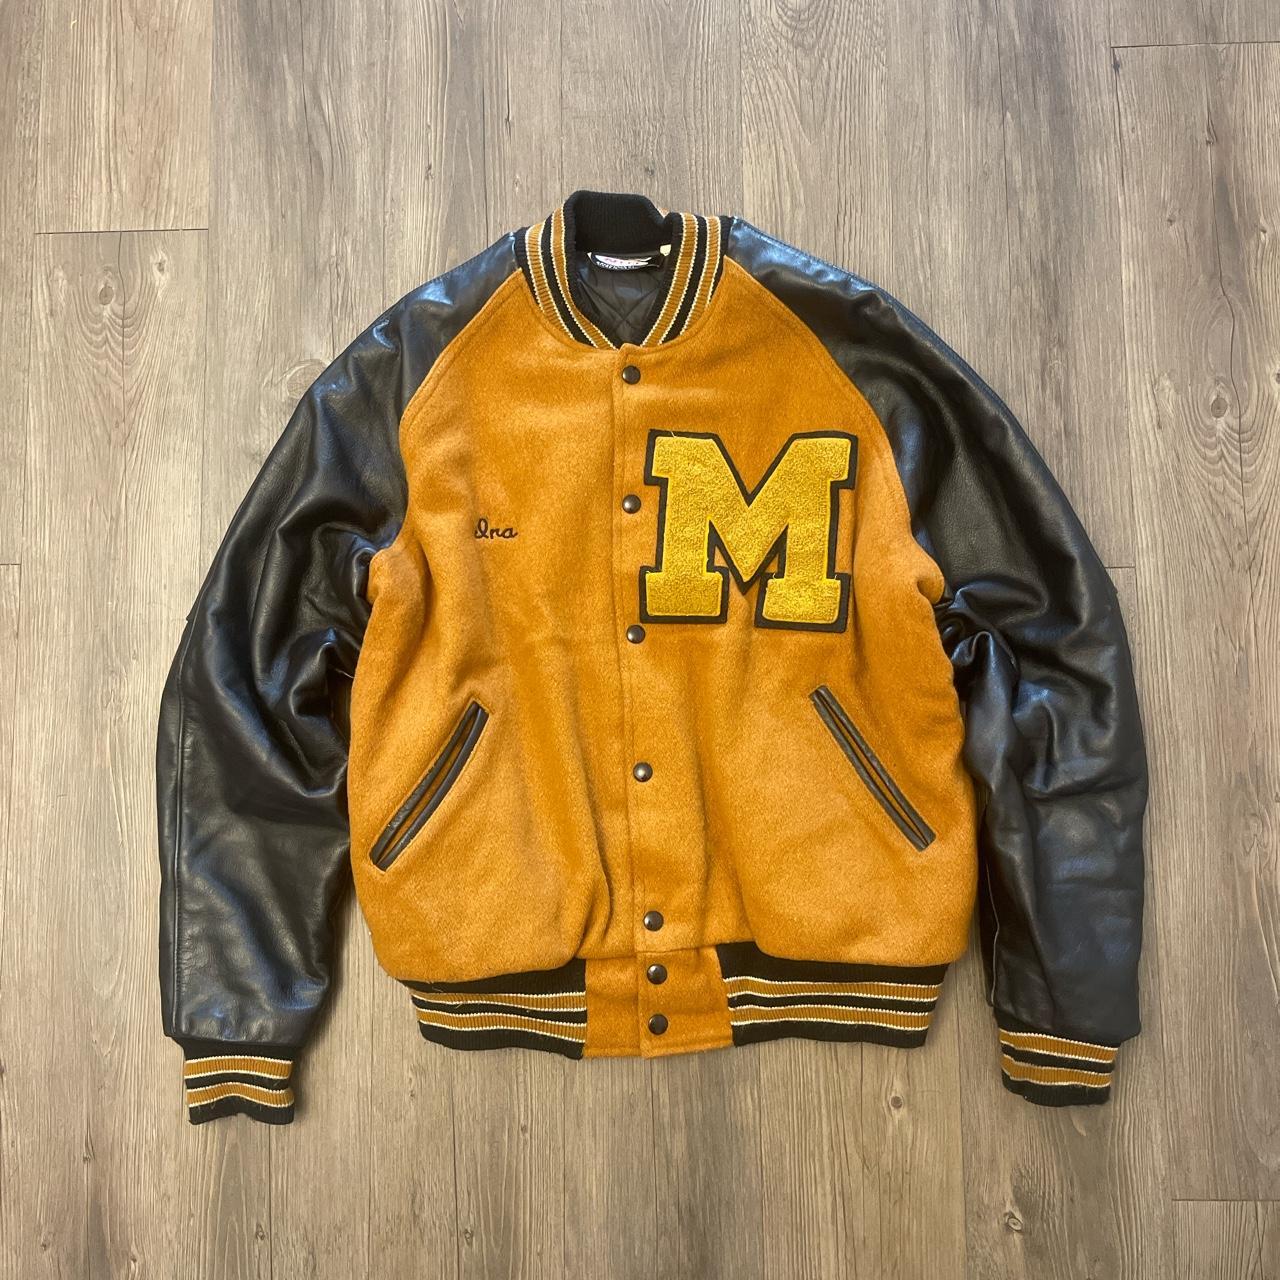 Men's Yellow and Black Letterman Jacket